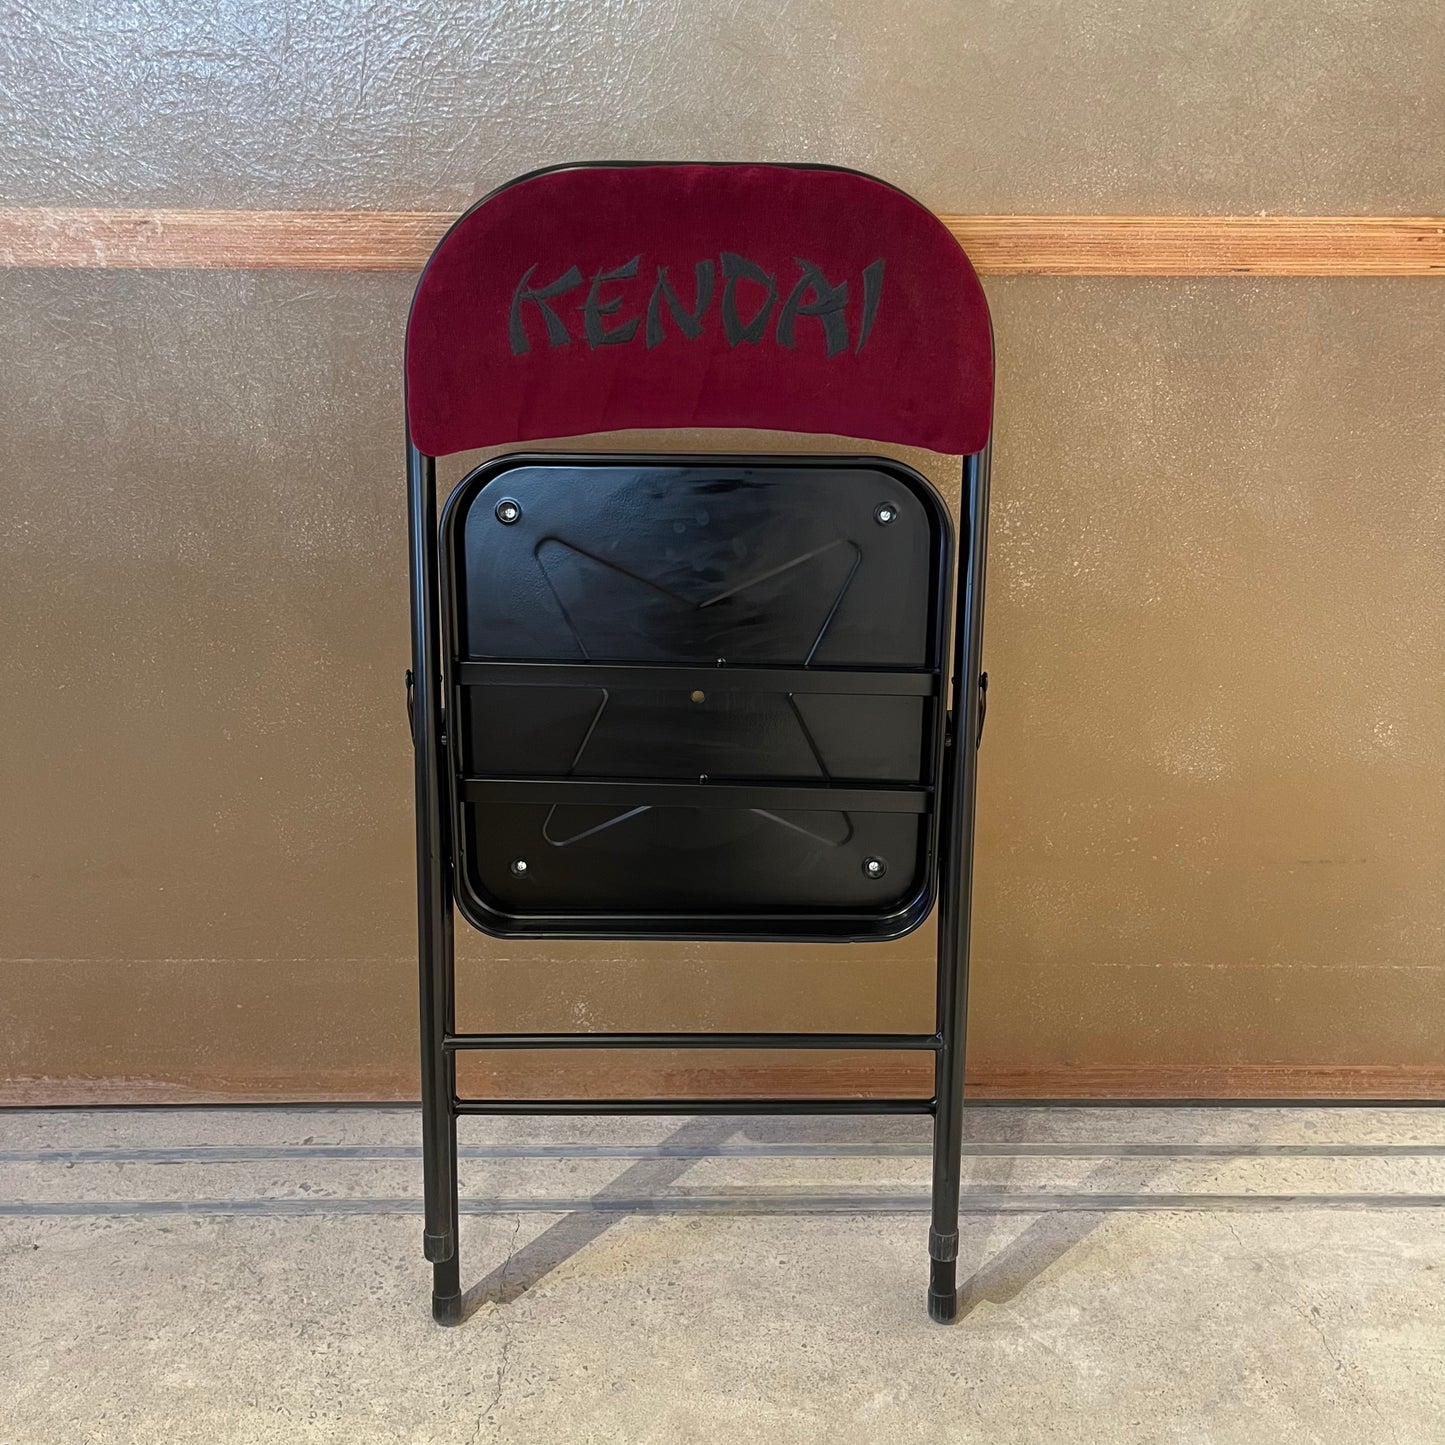 KENDAI Embroidery Chair Red